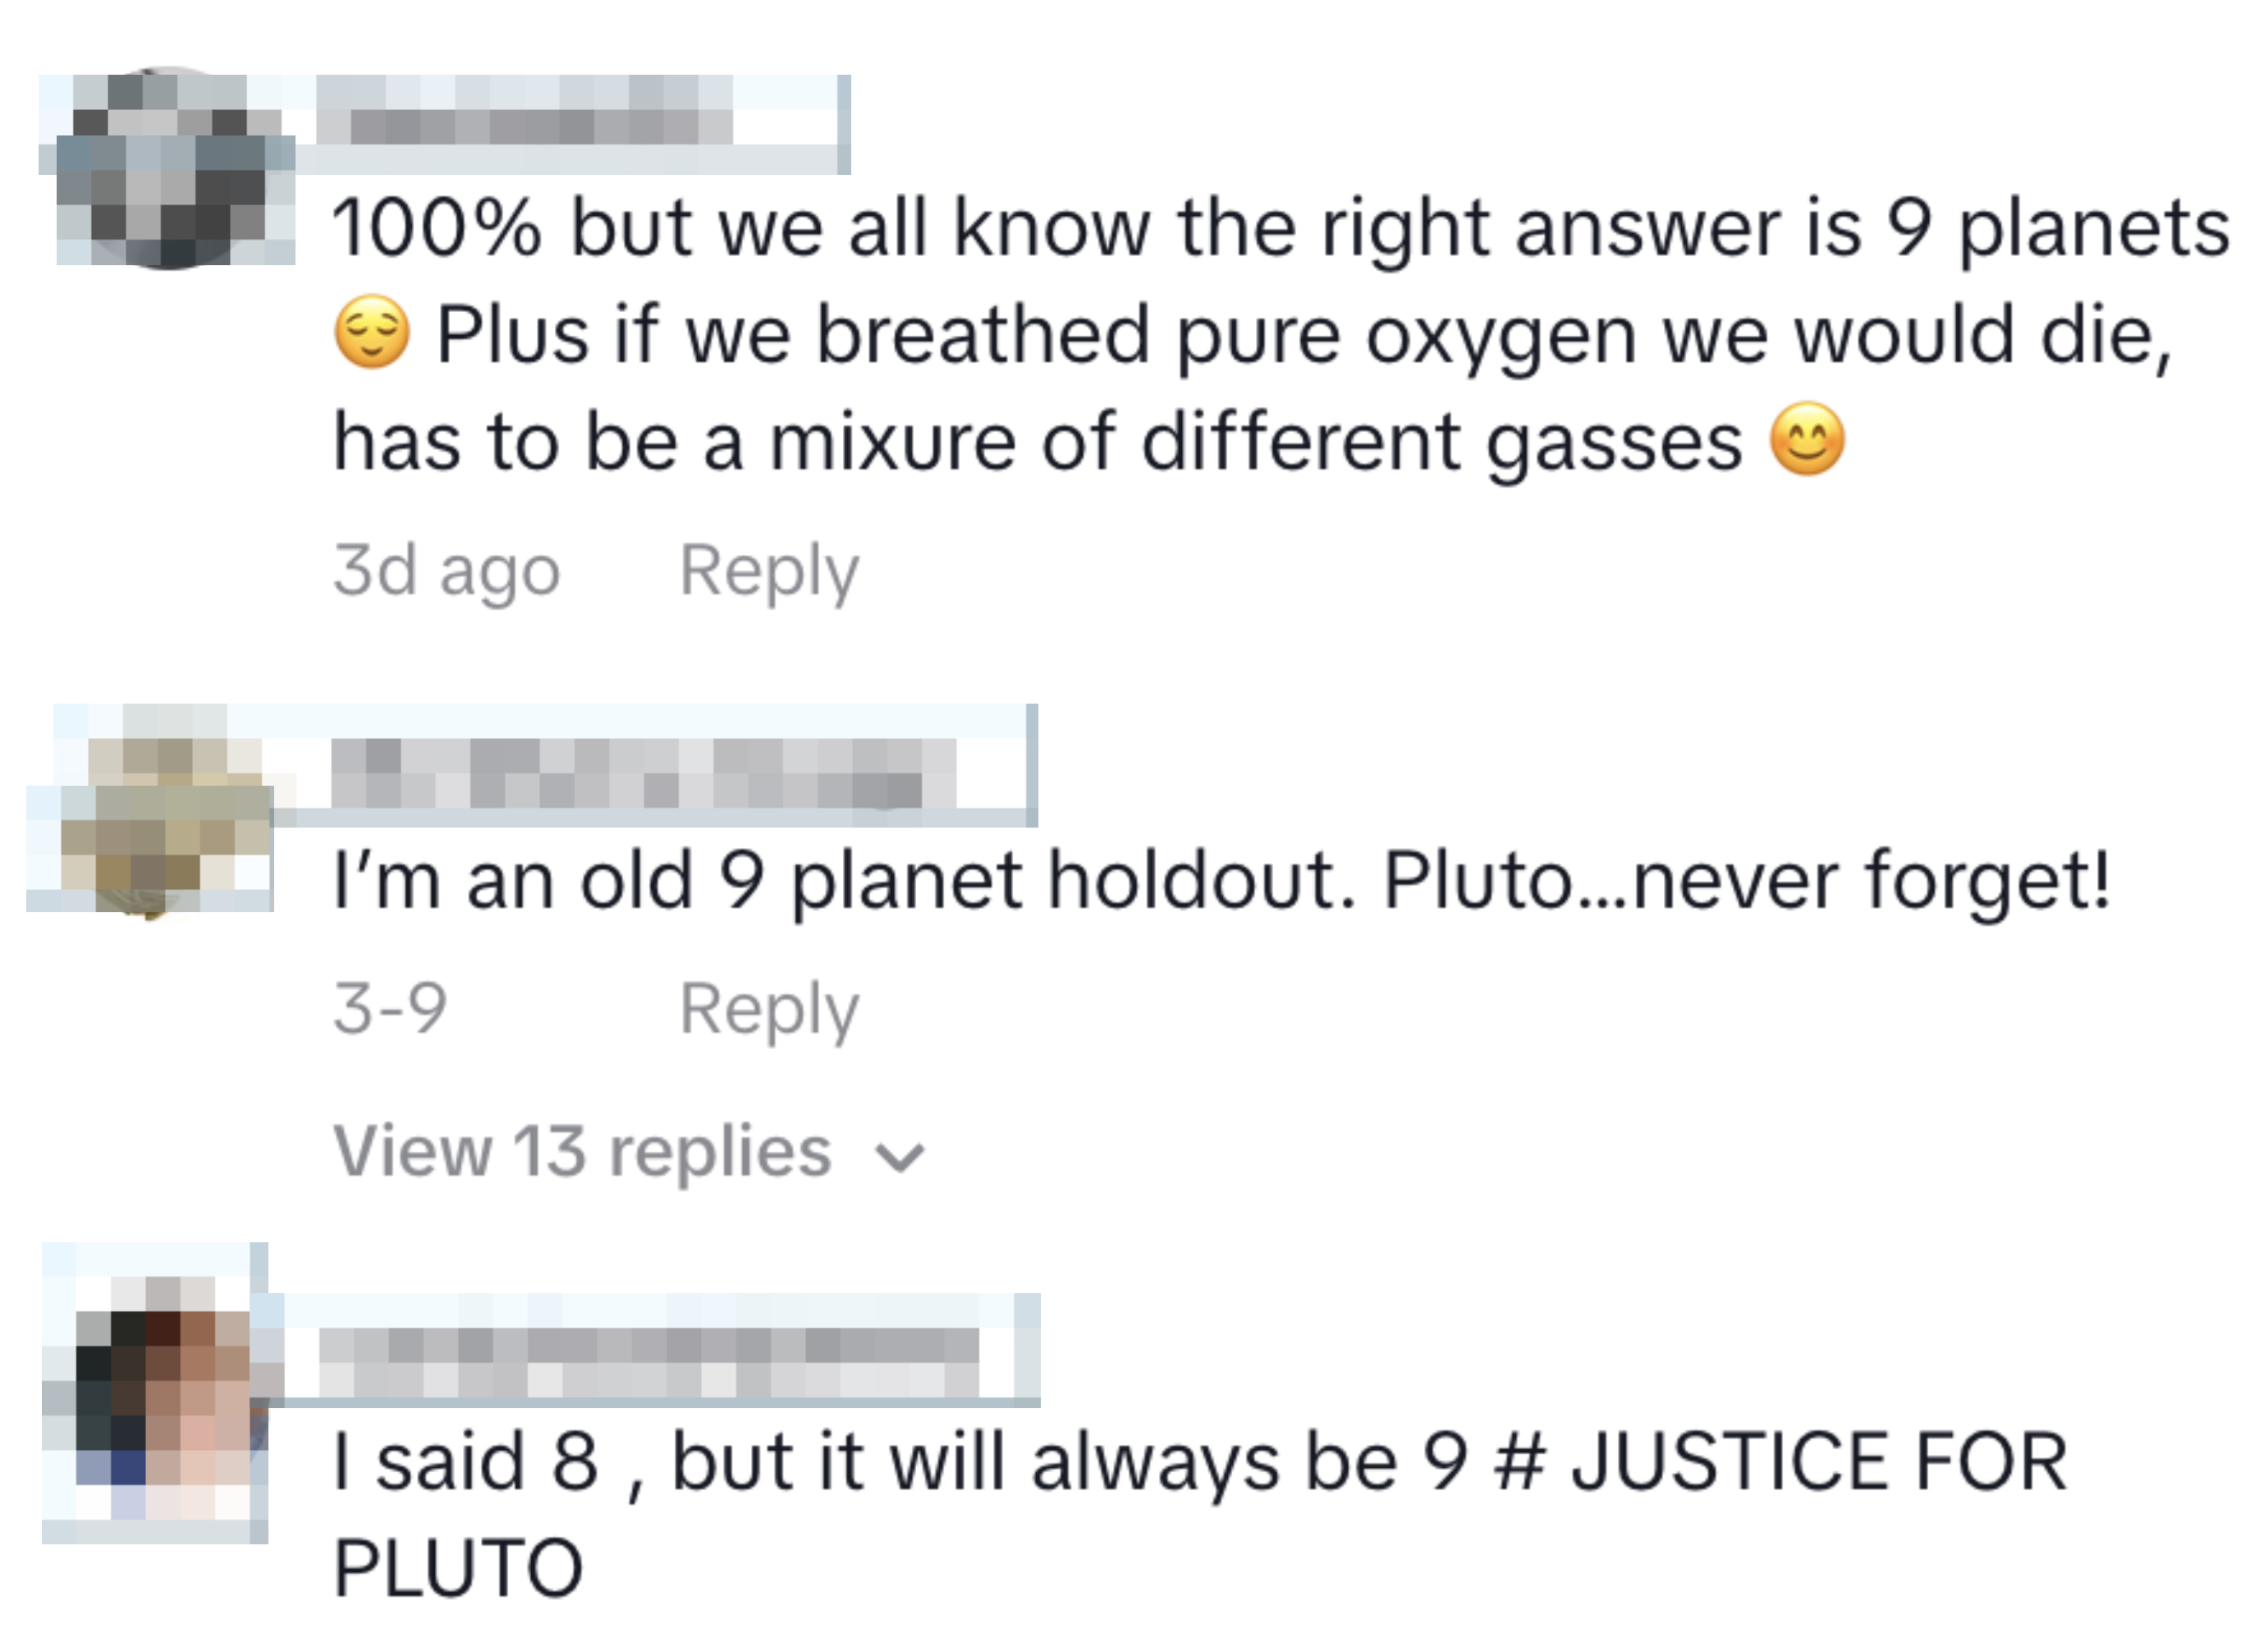 Image of a social media post with comments debating whether there are 9 planets, mentioning Pluto and the danger of breathing pure oxygen